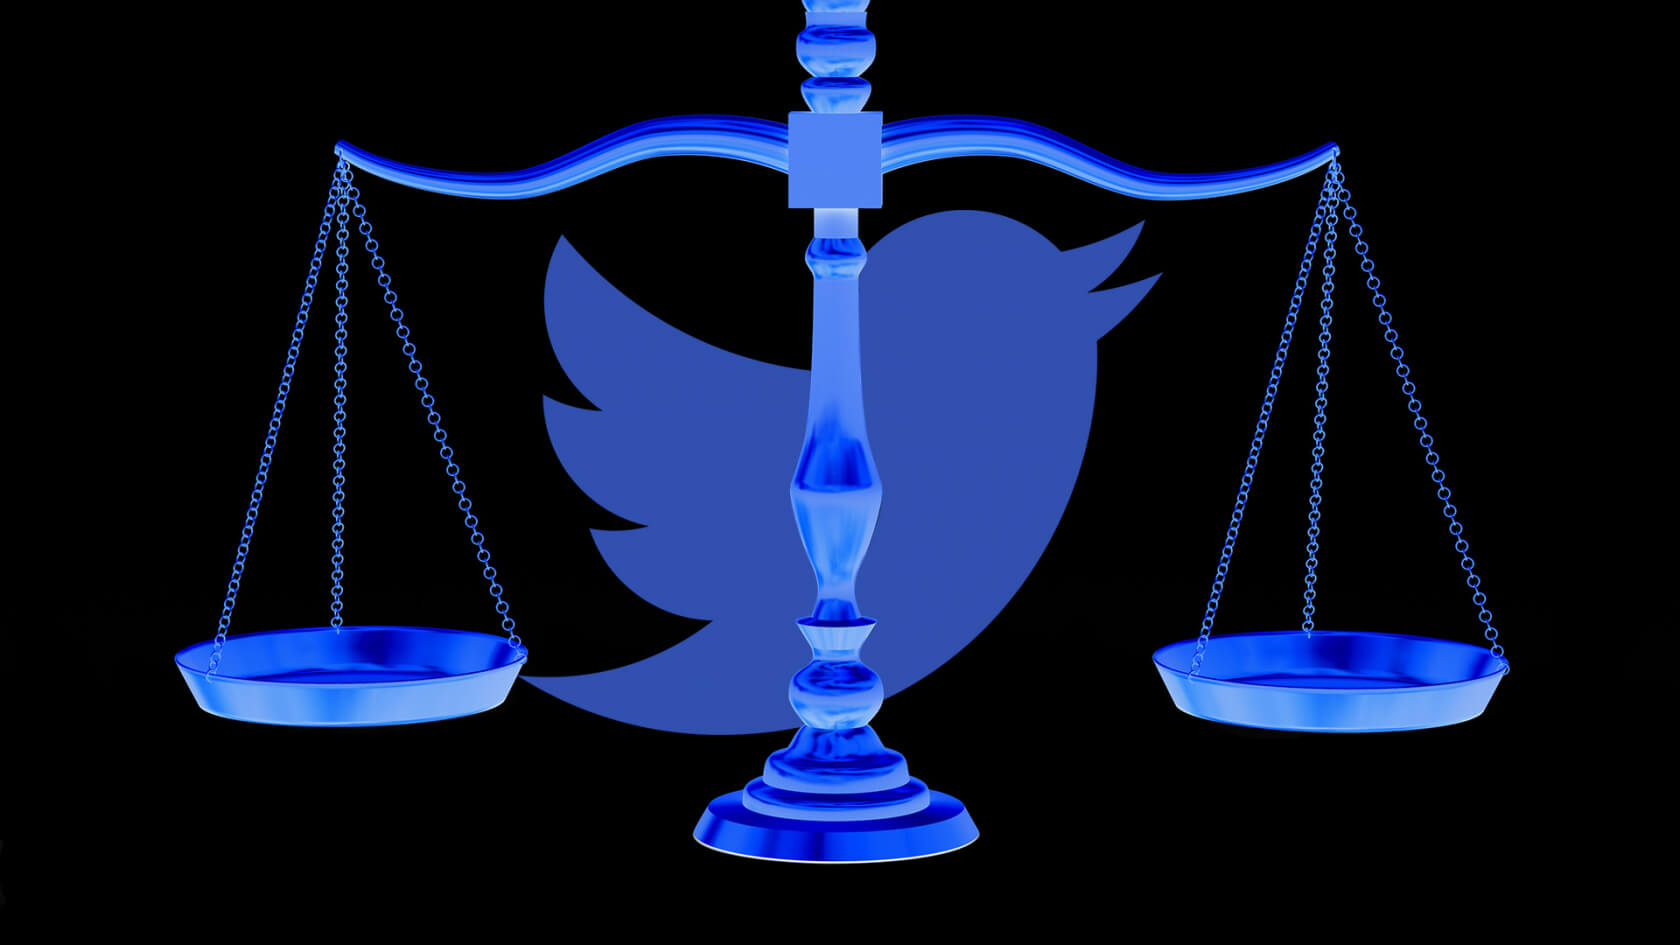 Appeals court throws out case blaming Twitter for ISIS attacks